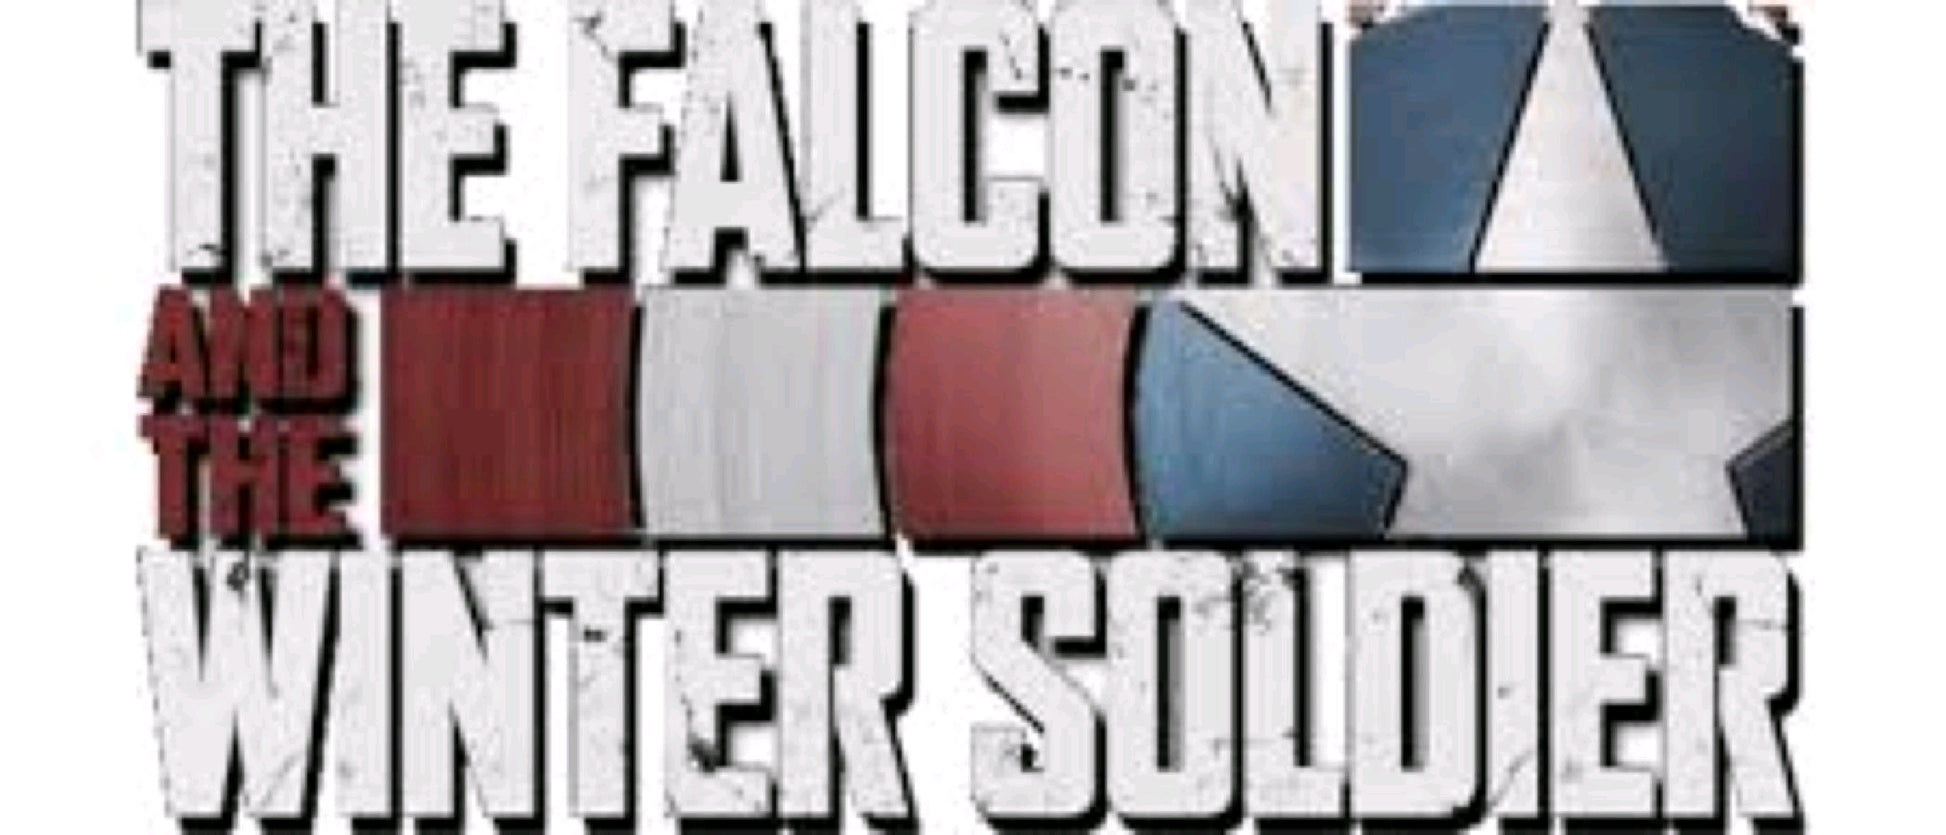 The Falcon and the Winter Soldier - U.S. Agent Pop! Vinyl